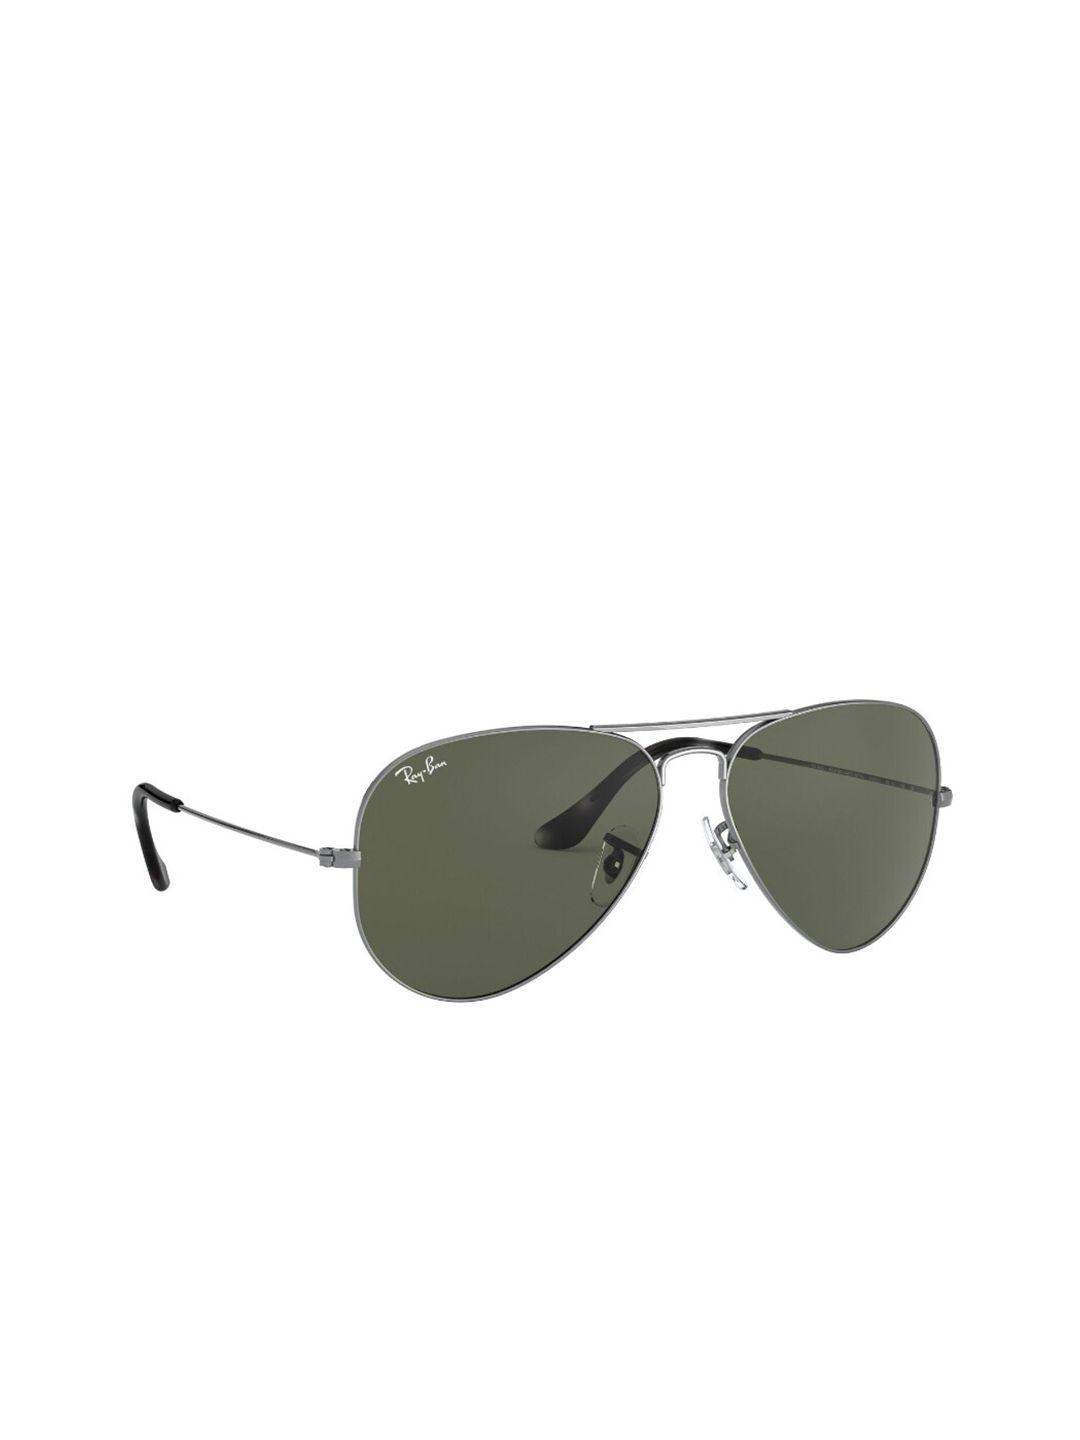 ray-ban green lens & steel-toned aviator sunglasses with uv protected lens 8056597139649